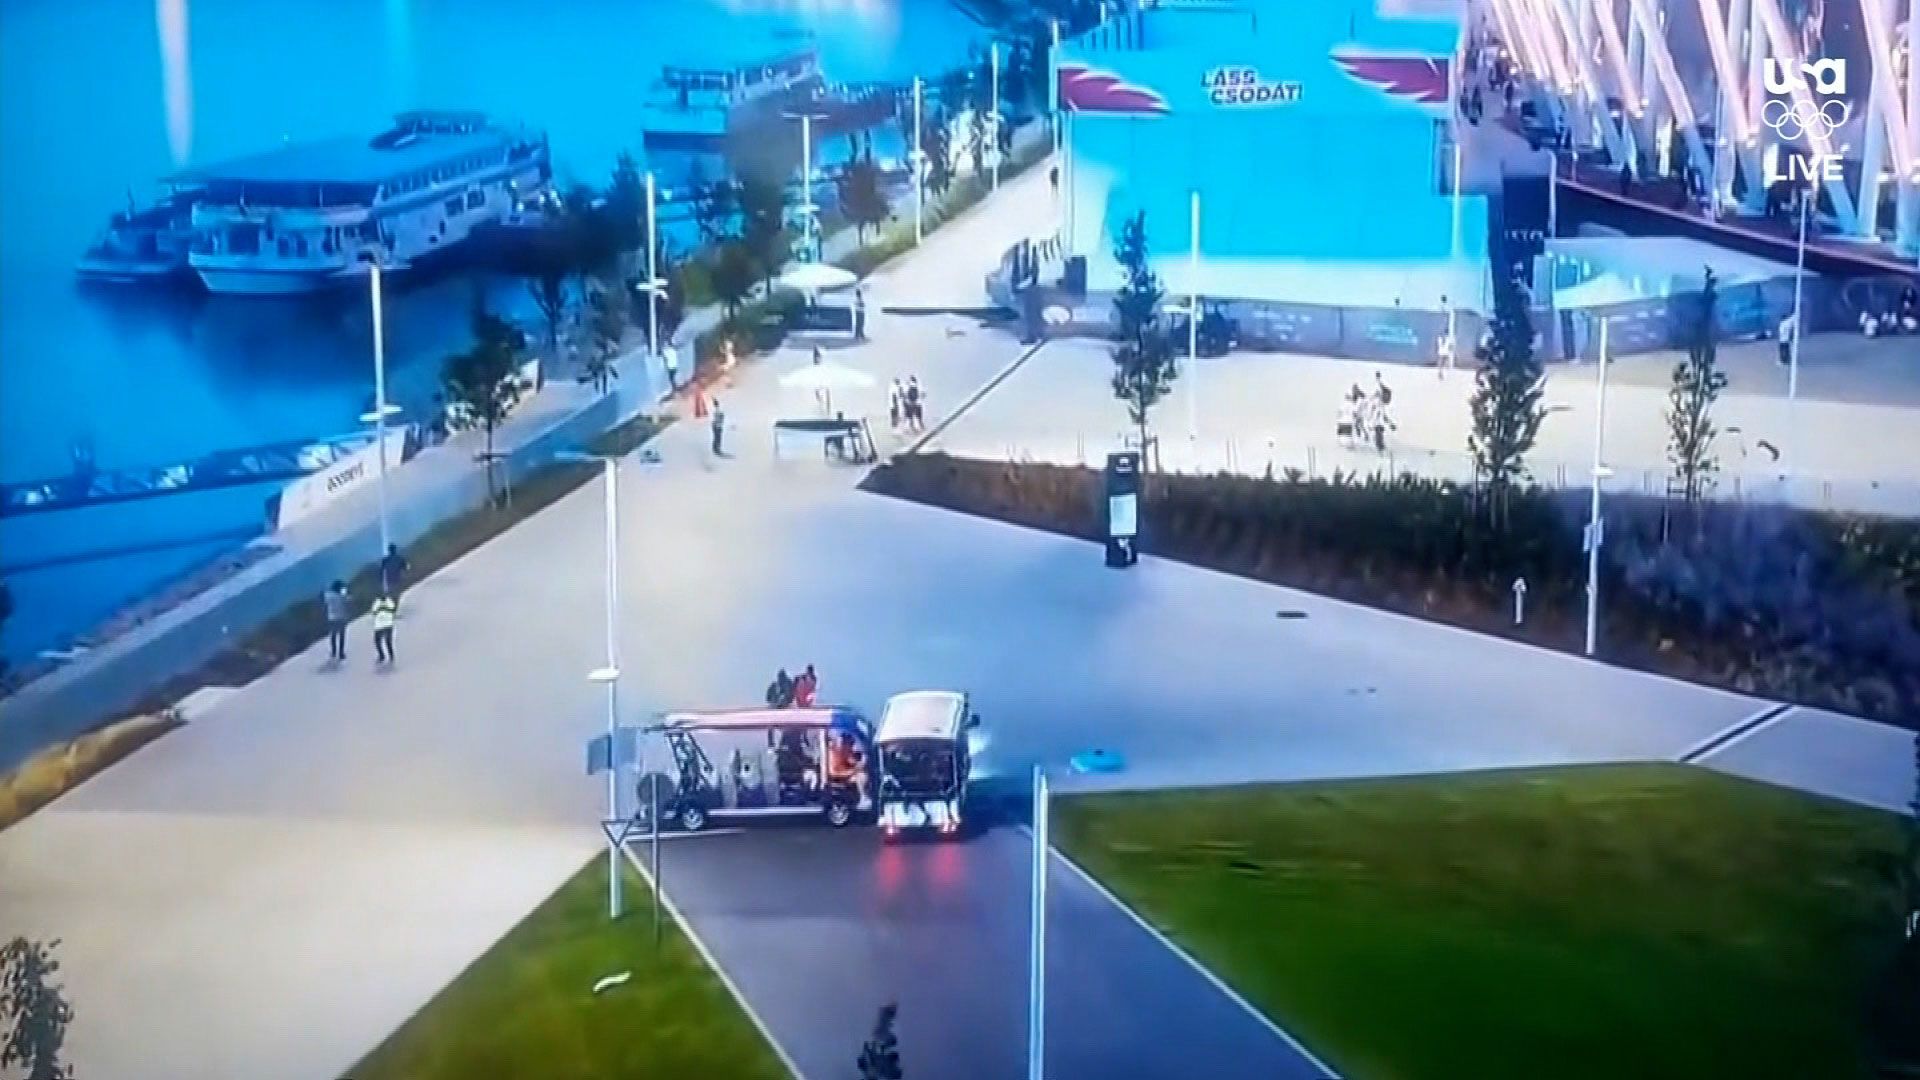 There was a surprise marriage proposal at the World Athletics Championship  after 35km race walk